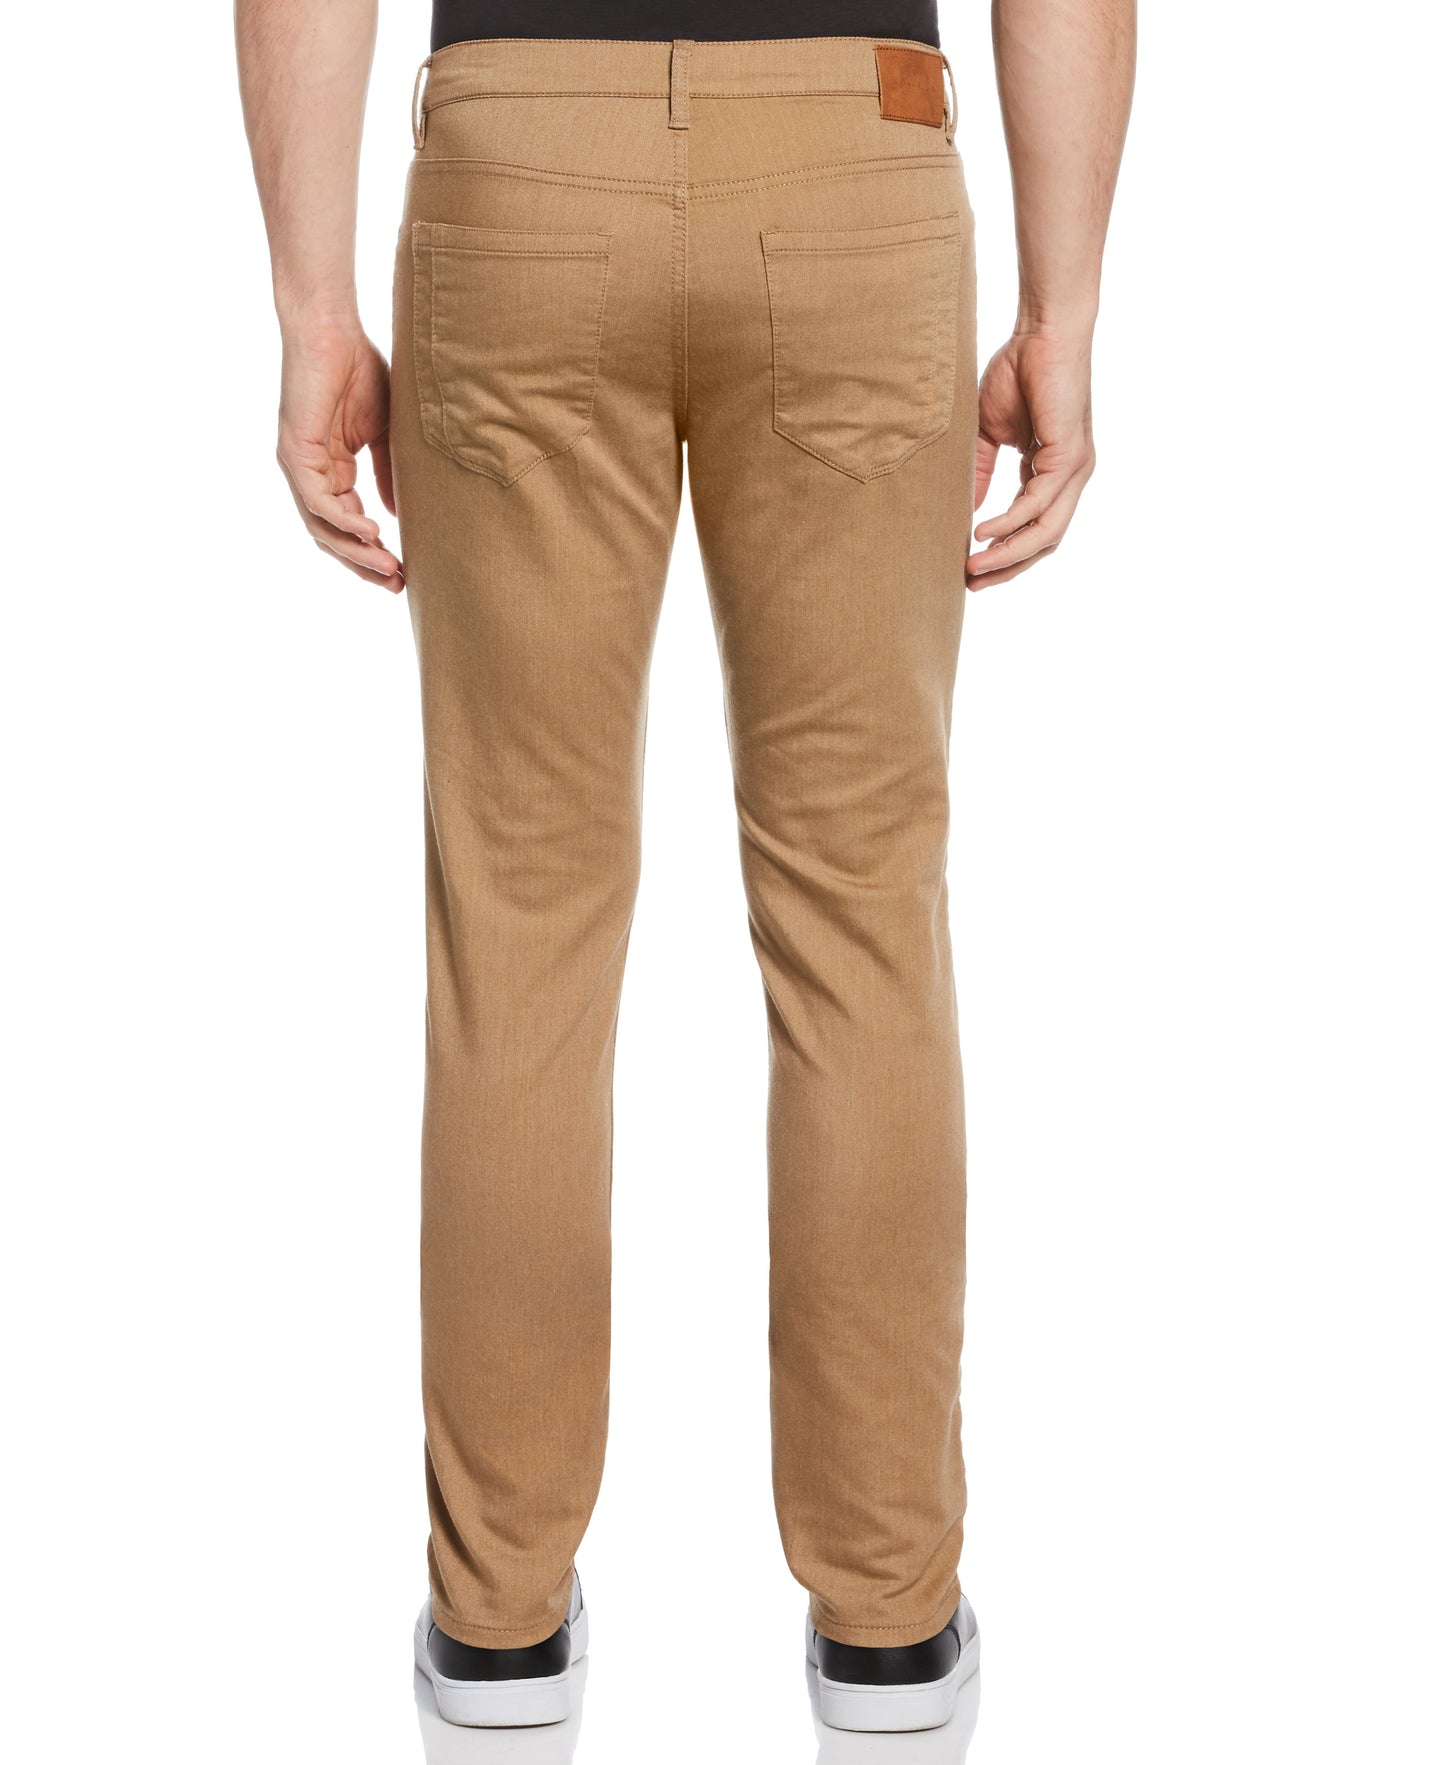 Skinny Fit Stretch Heather Anywhere 5-Pocket Pant